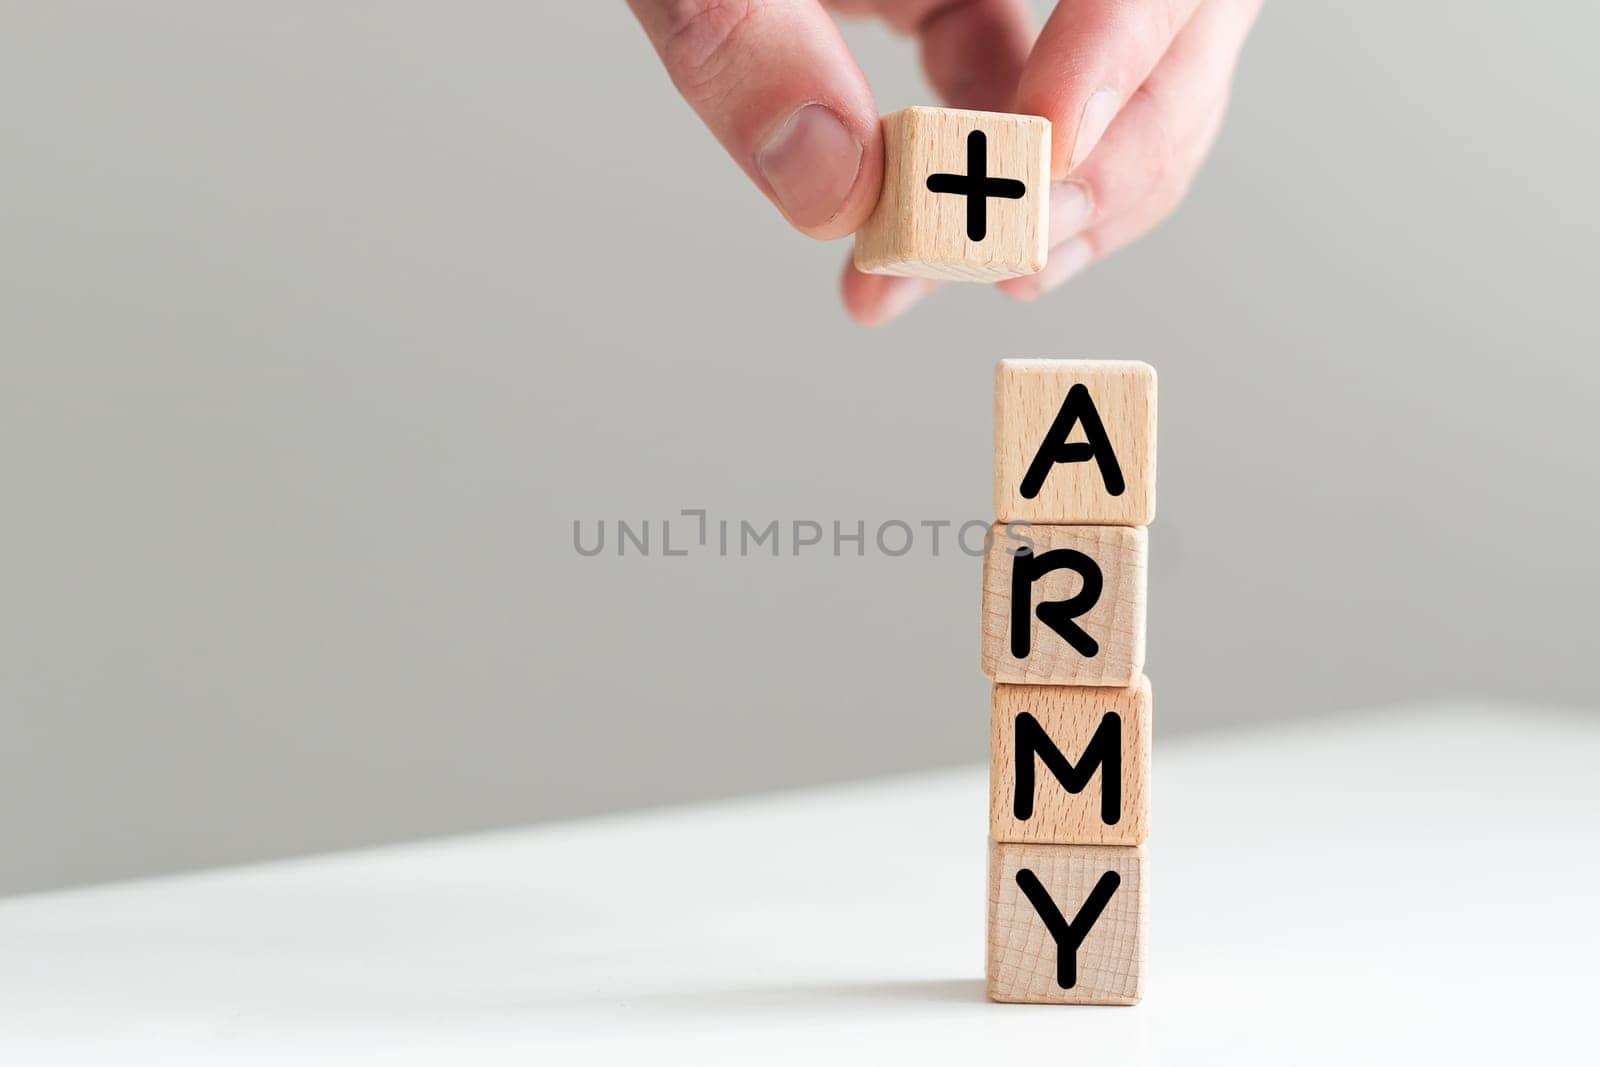 dot army - internet domain for army. High quality photo